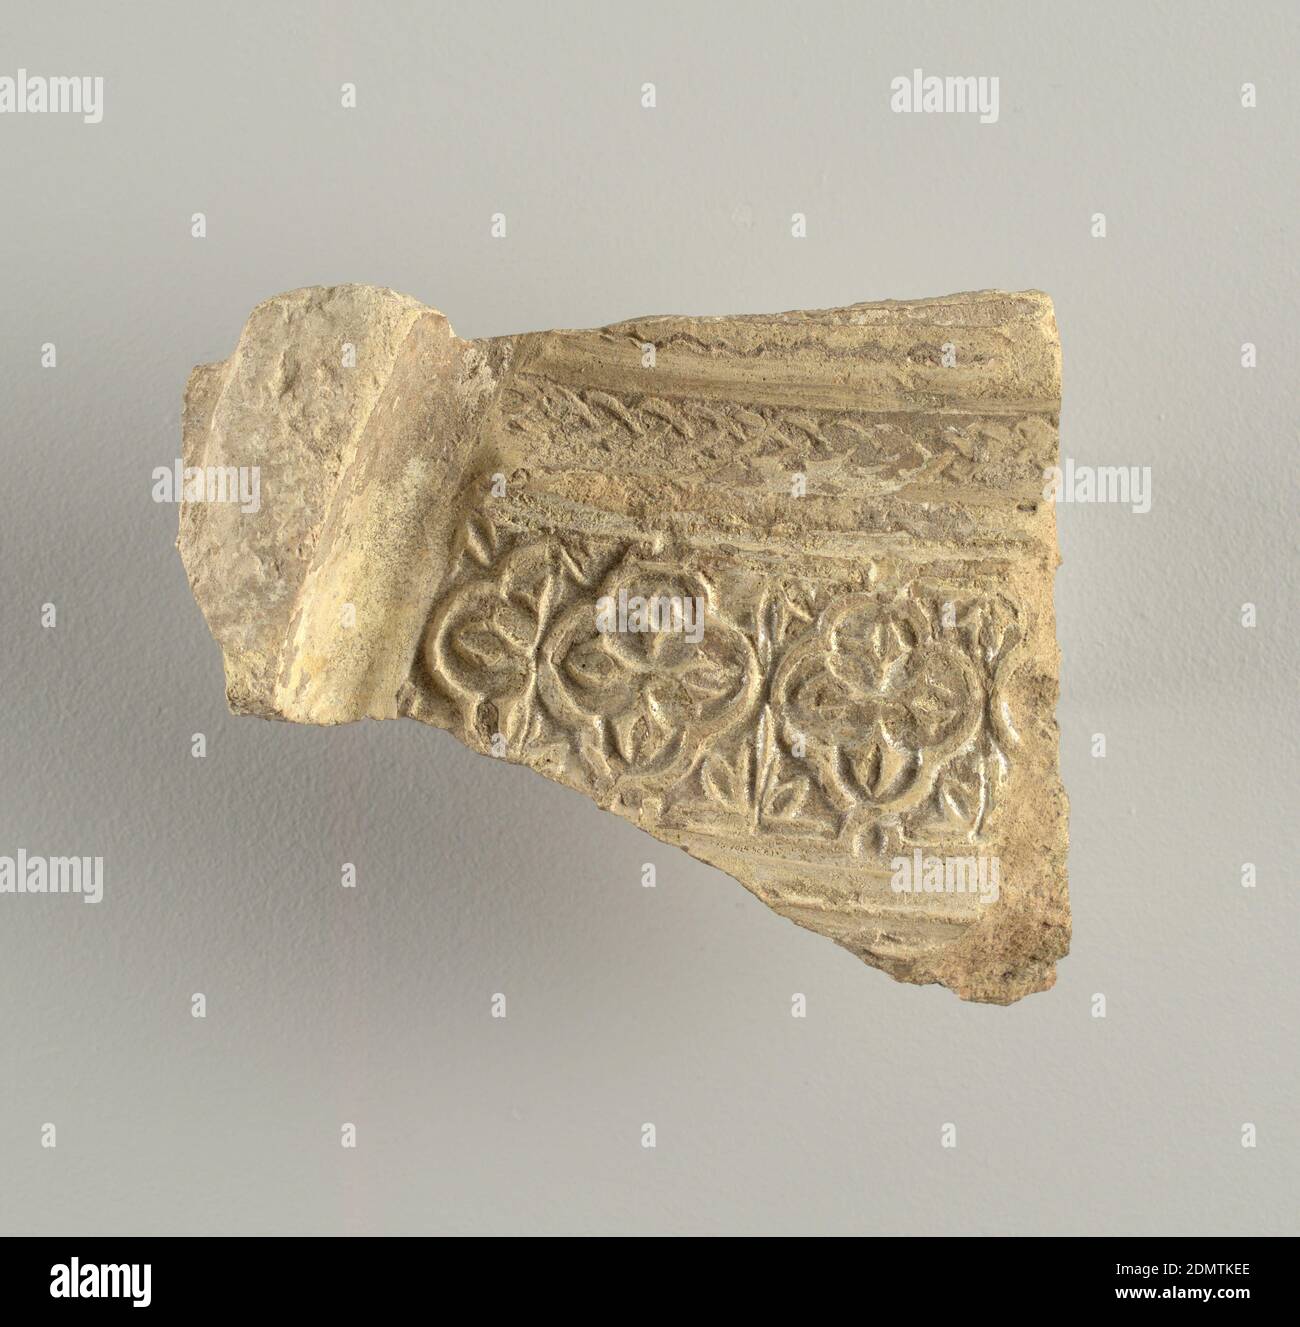 Pot sherd, tin-enamelled earthenware, Irregular fragment with flanged edge and ornament in relief consisting of quatrefoil and chain motifs surmounting an incised wavy line. Pearly iridescence., Seville, Spain, 14th–16th century, tiles, Decorative Arts, Pot sherd Stock Photo